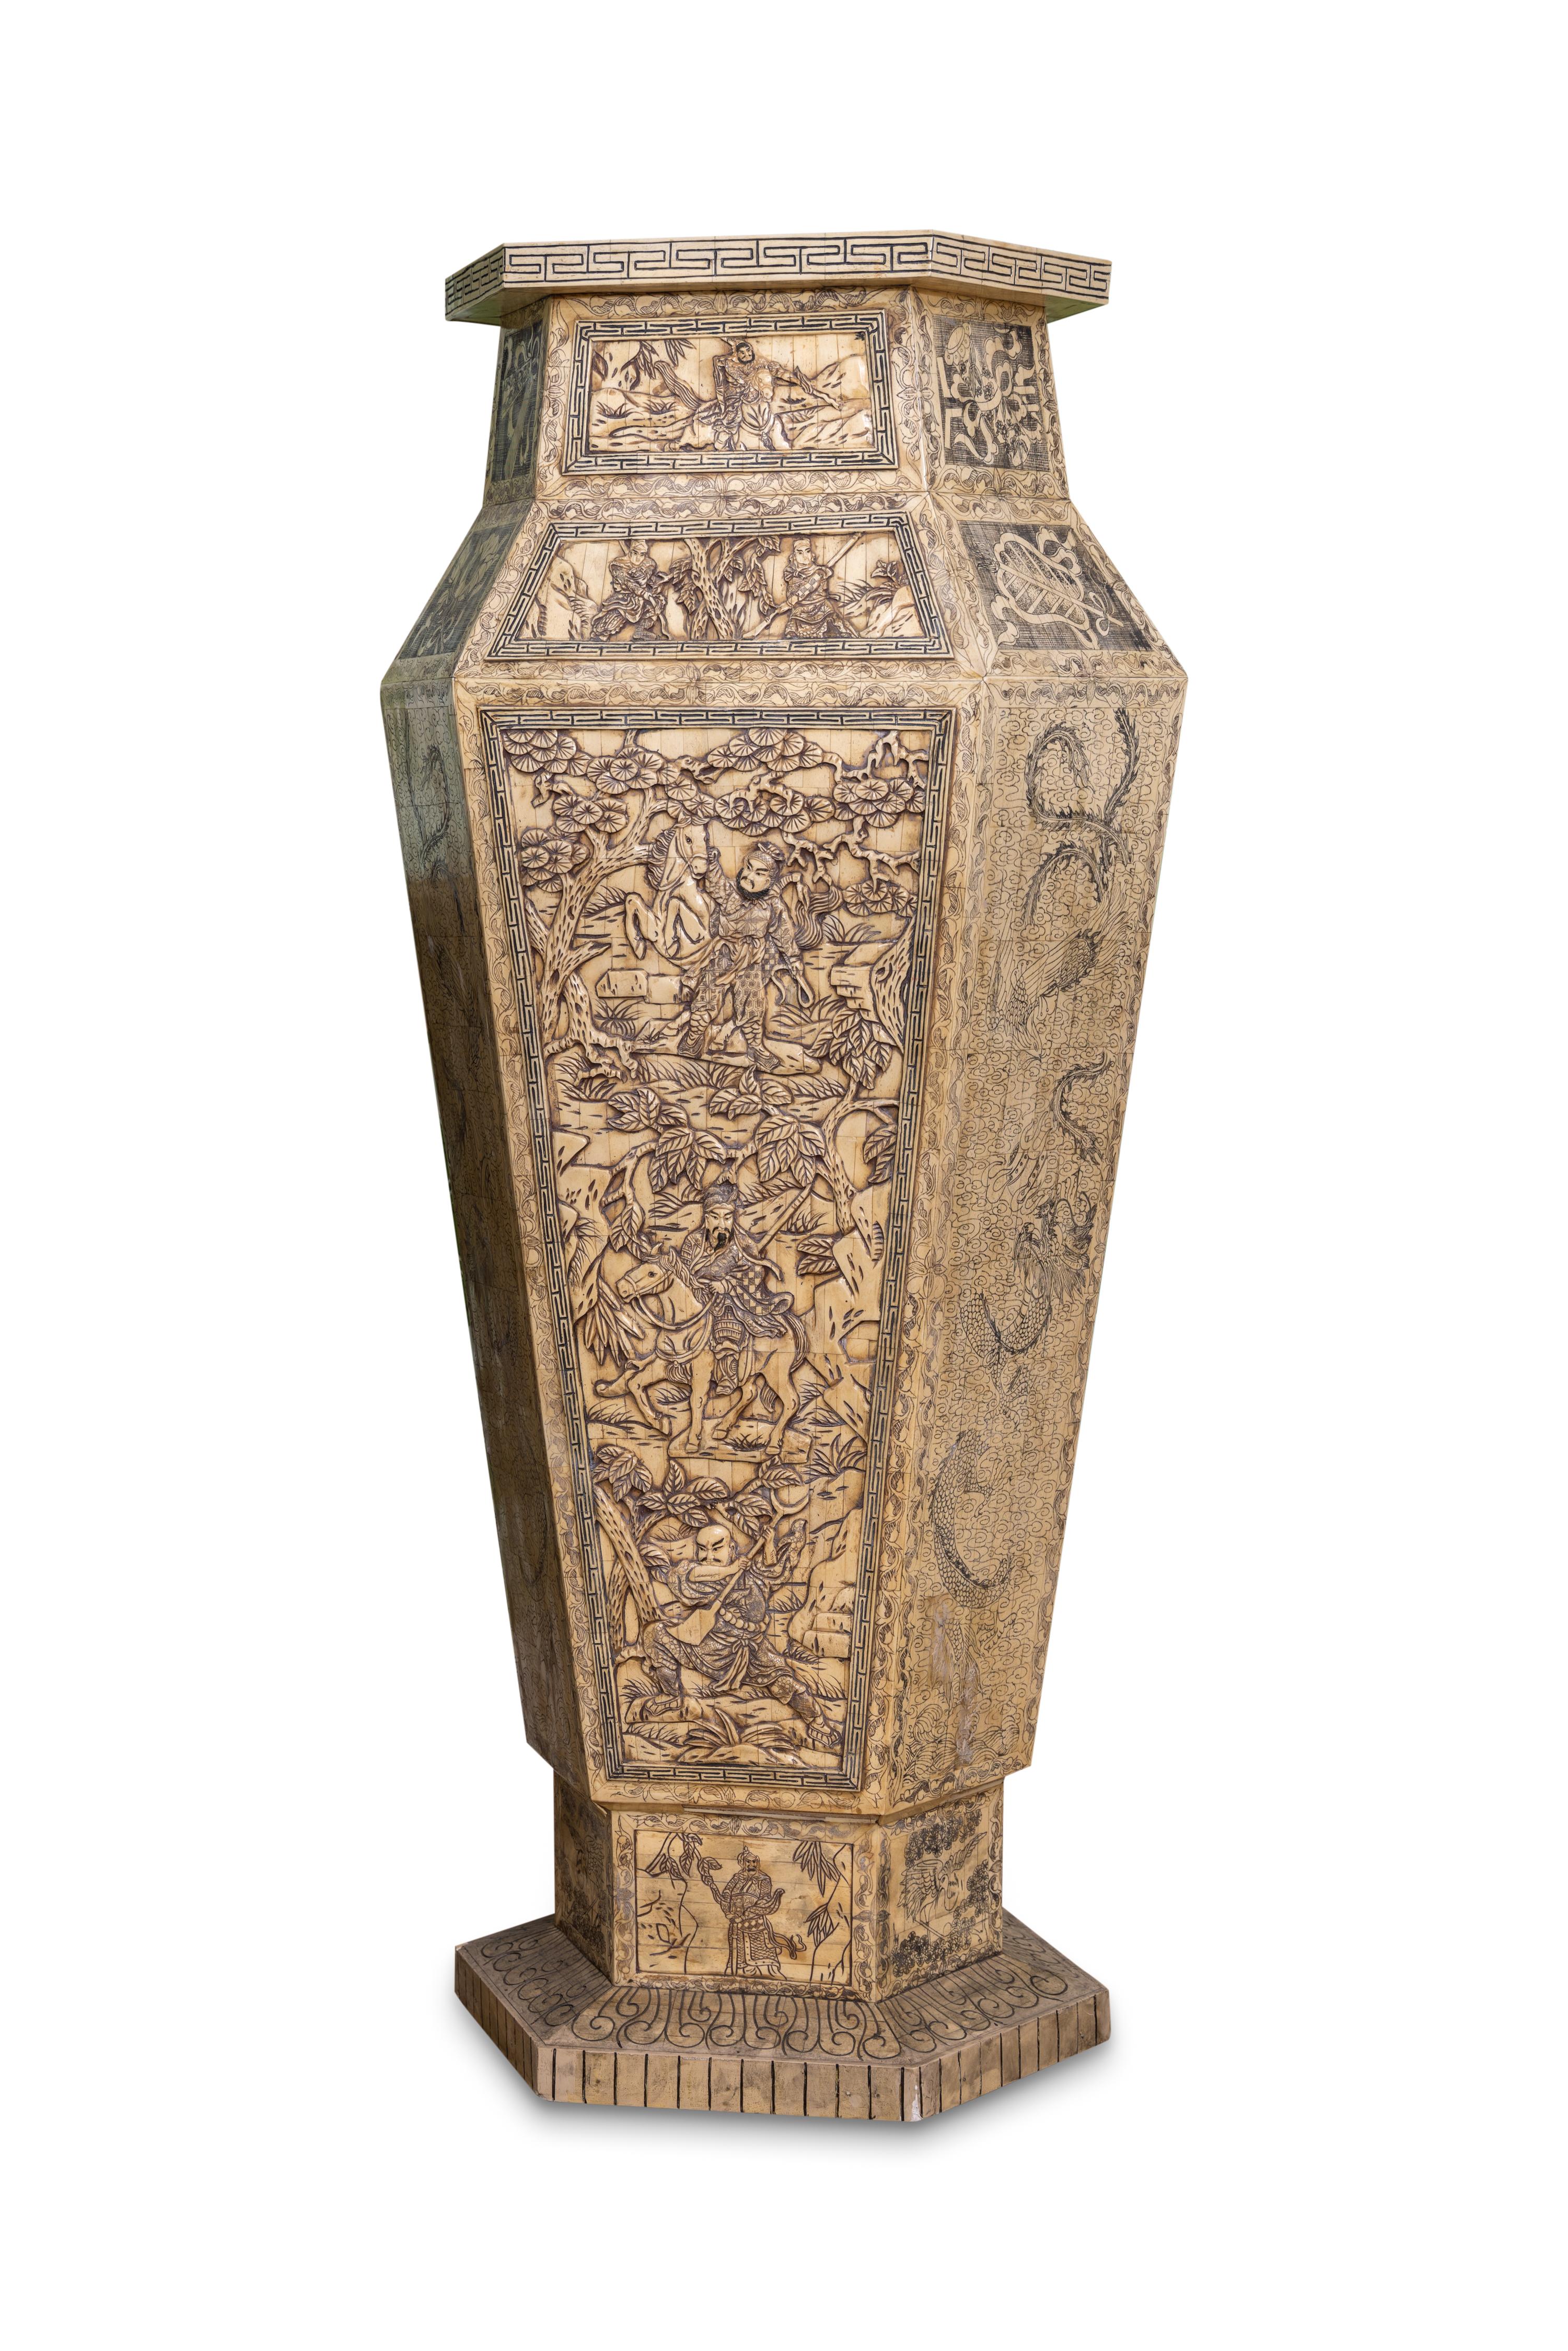 20th Century Pair of Monumental Oversized Bone Pedestals With Intricate Detail Design For Sale